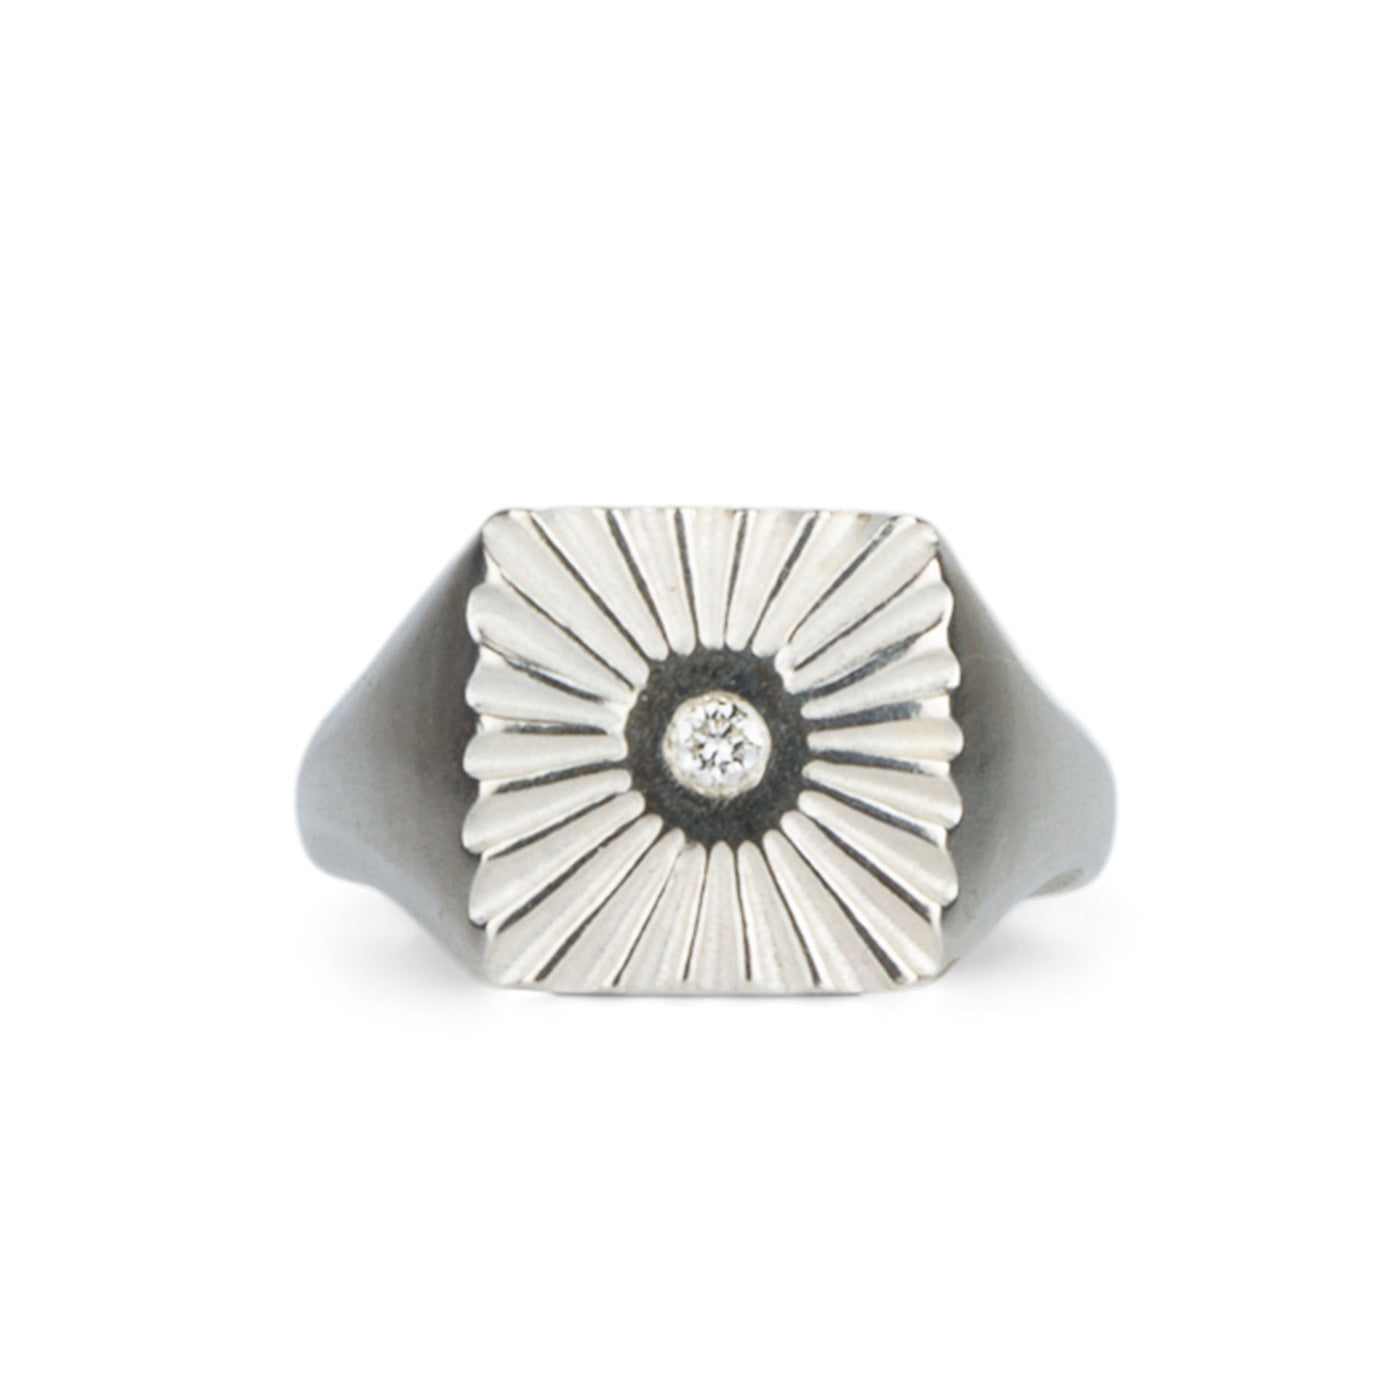 Large silver square signet ring with a carved sunburst pattern and diamond center on a white background